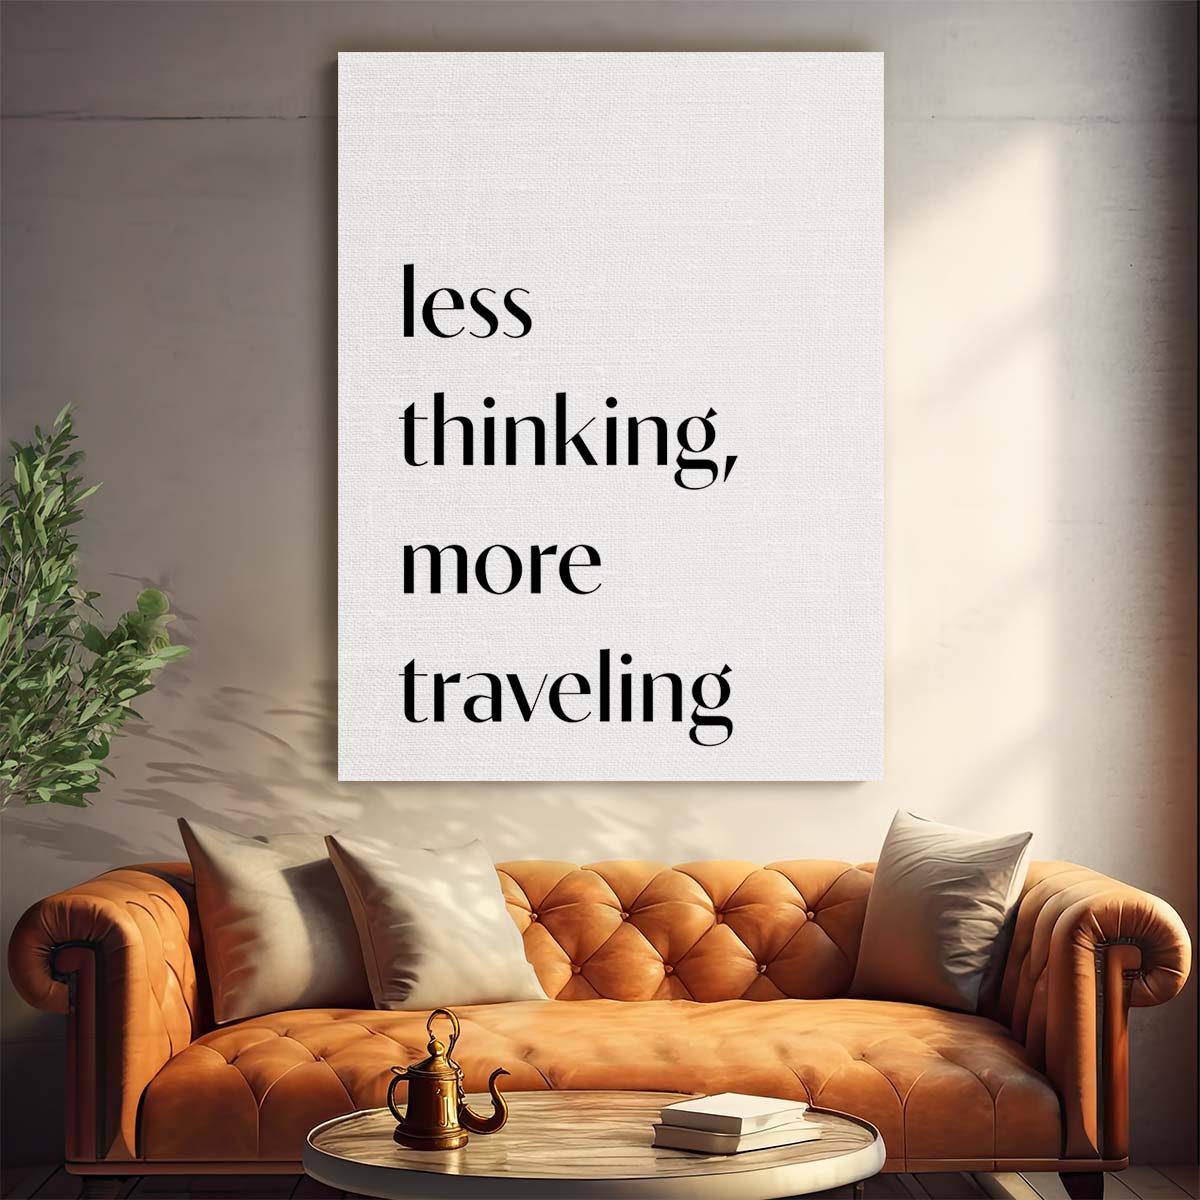 Black & White Travel Typography Illustration - Motivational Quote Art by Luxuriance Designs, made in USA